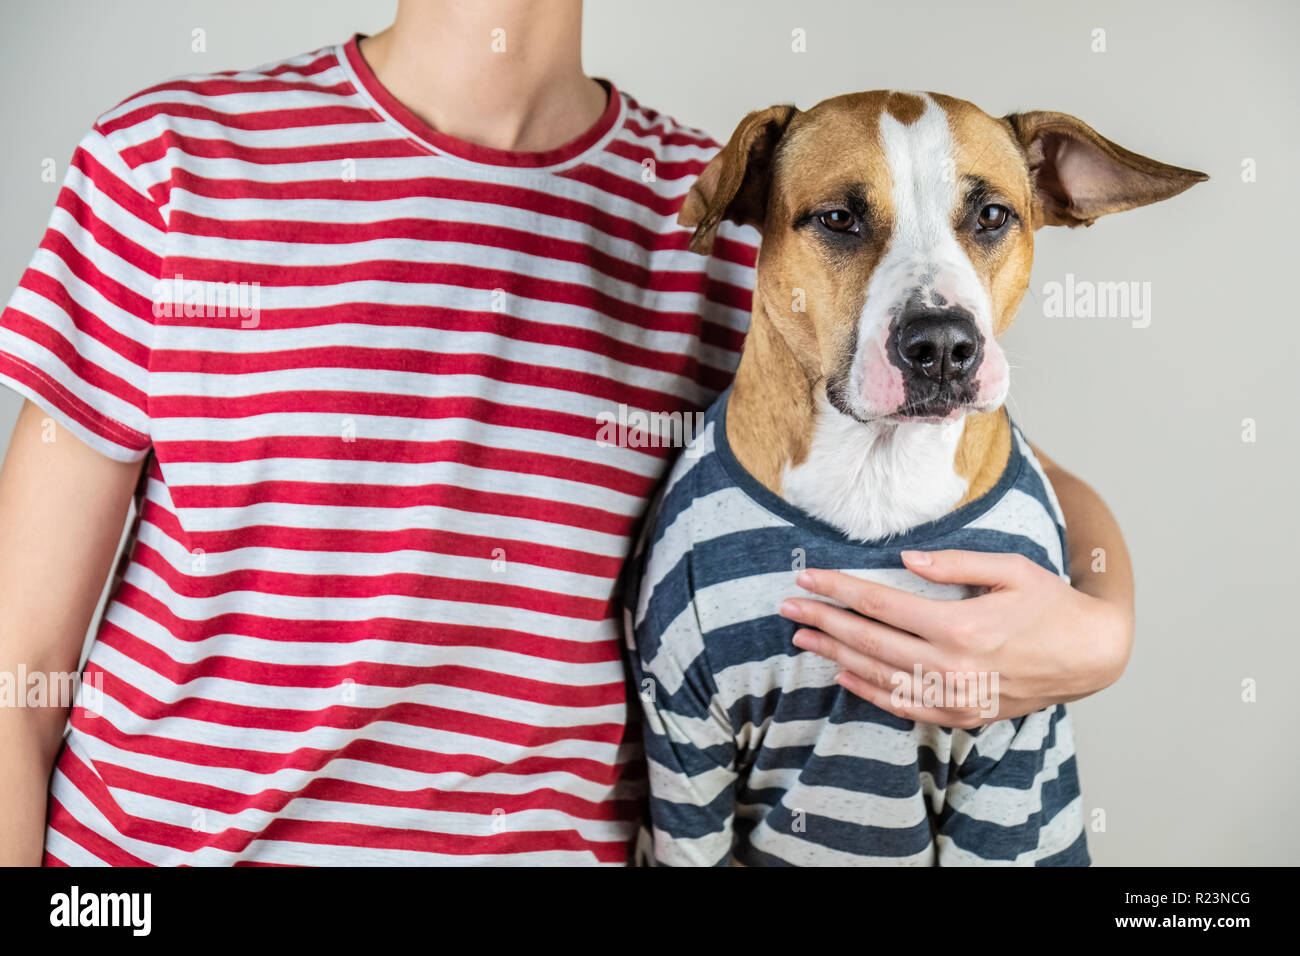 Funny dog and owner in similar clothes. Staffordshire terrier and human dressed in same t-shirts in studio background Stock Photo